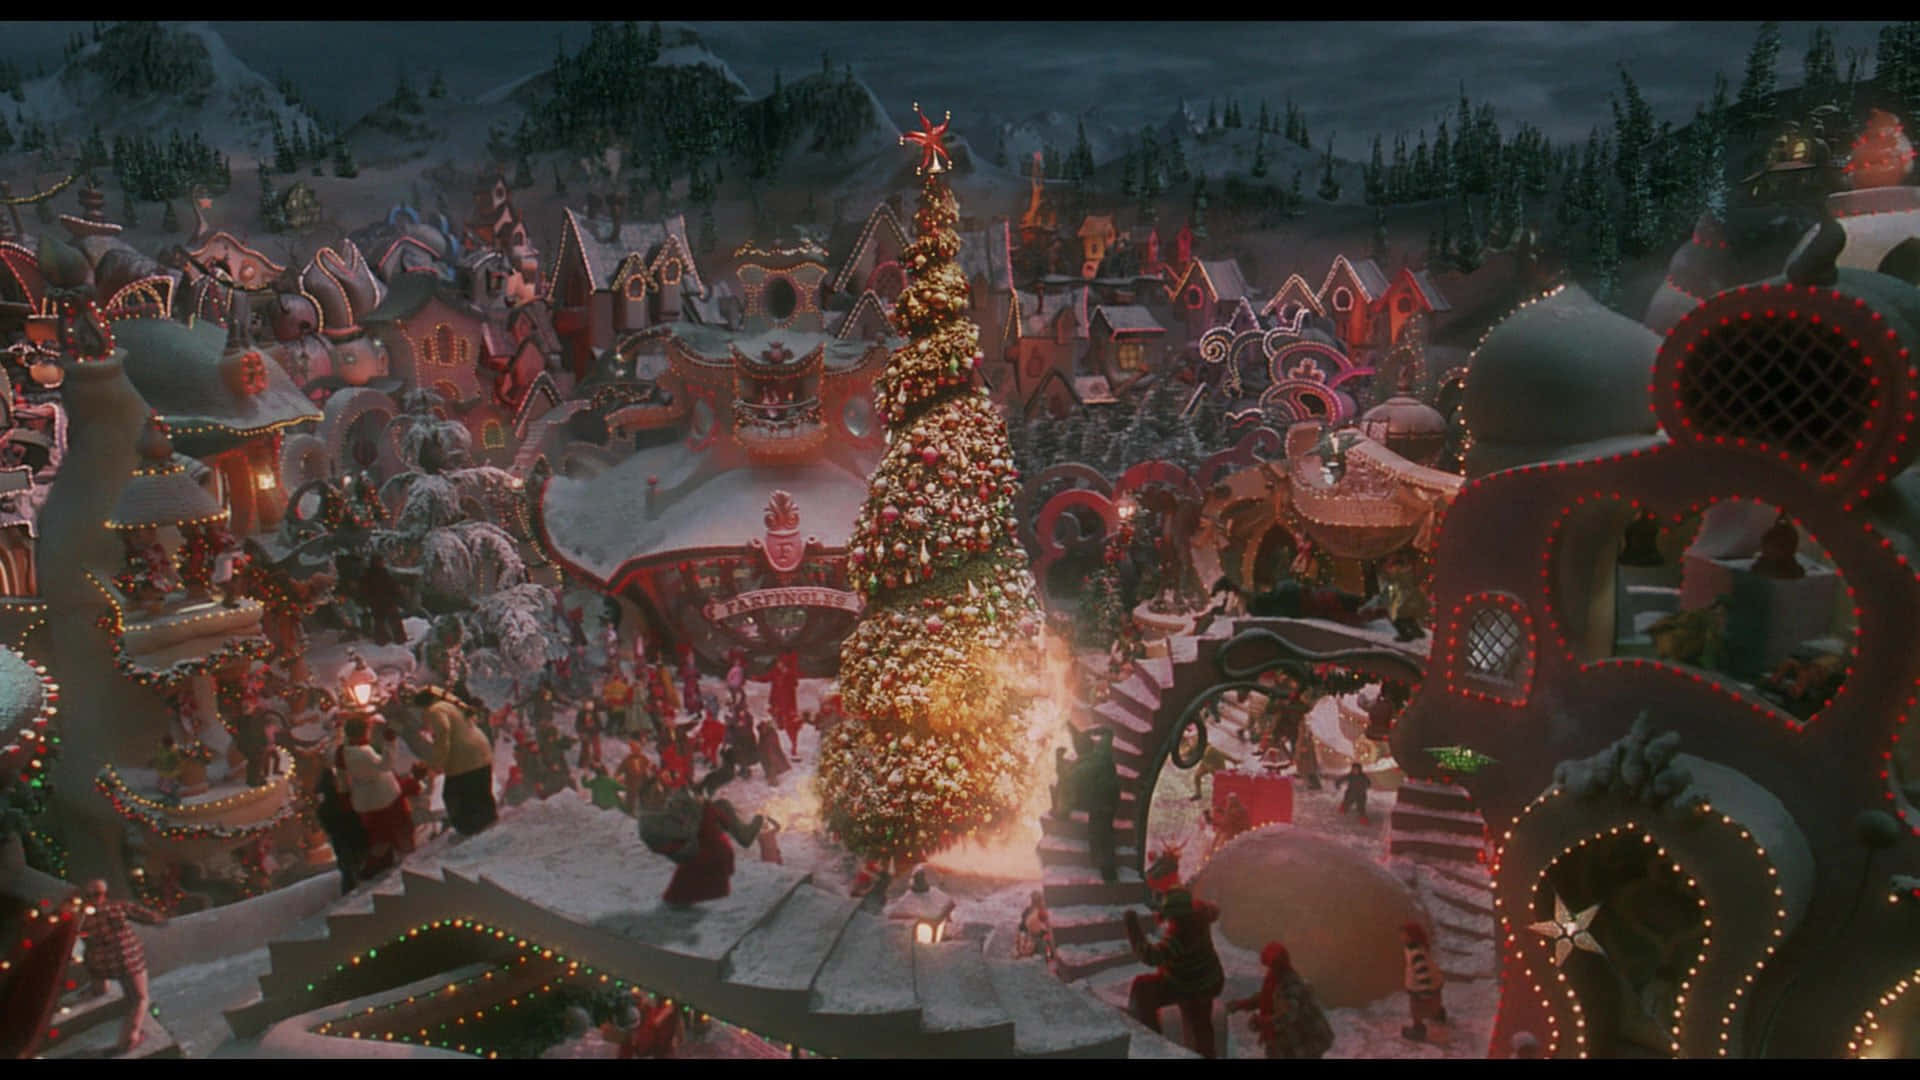 Step into the magical town of Whoville Wallpaper